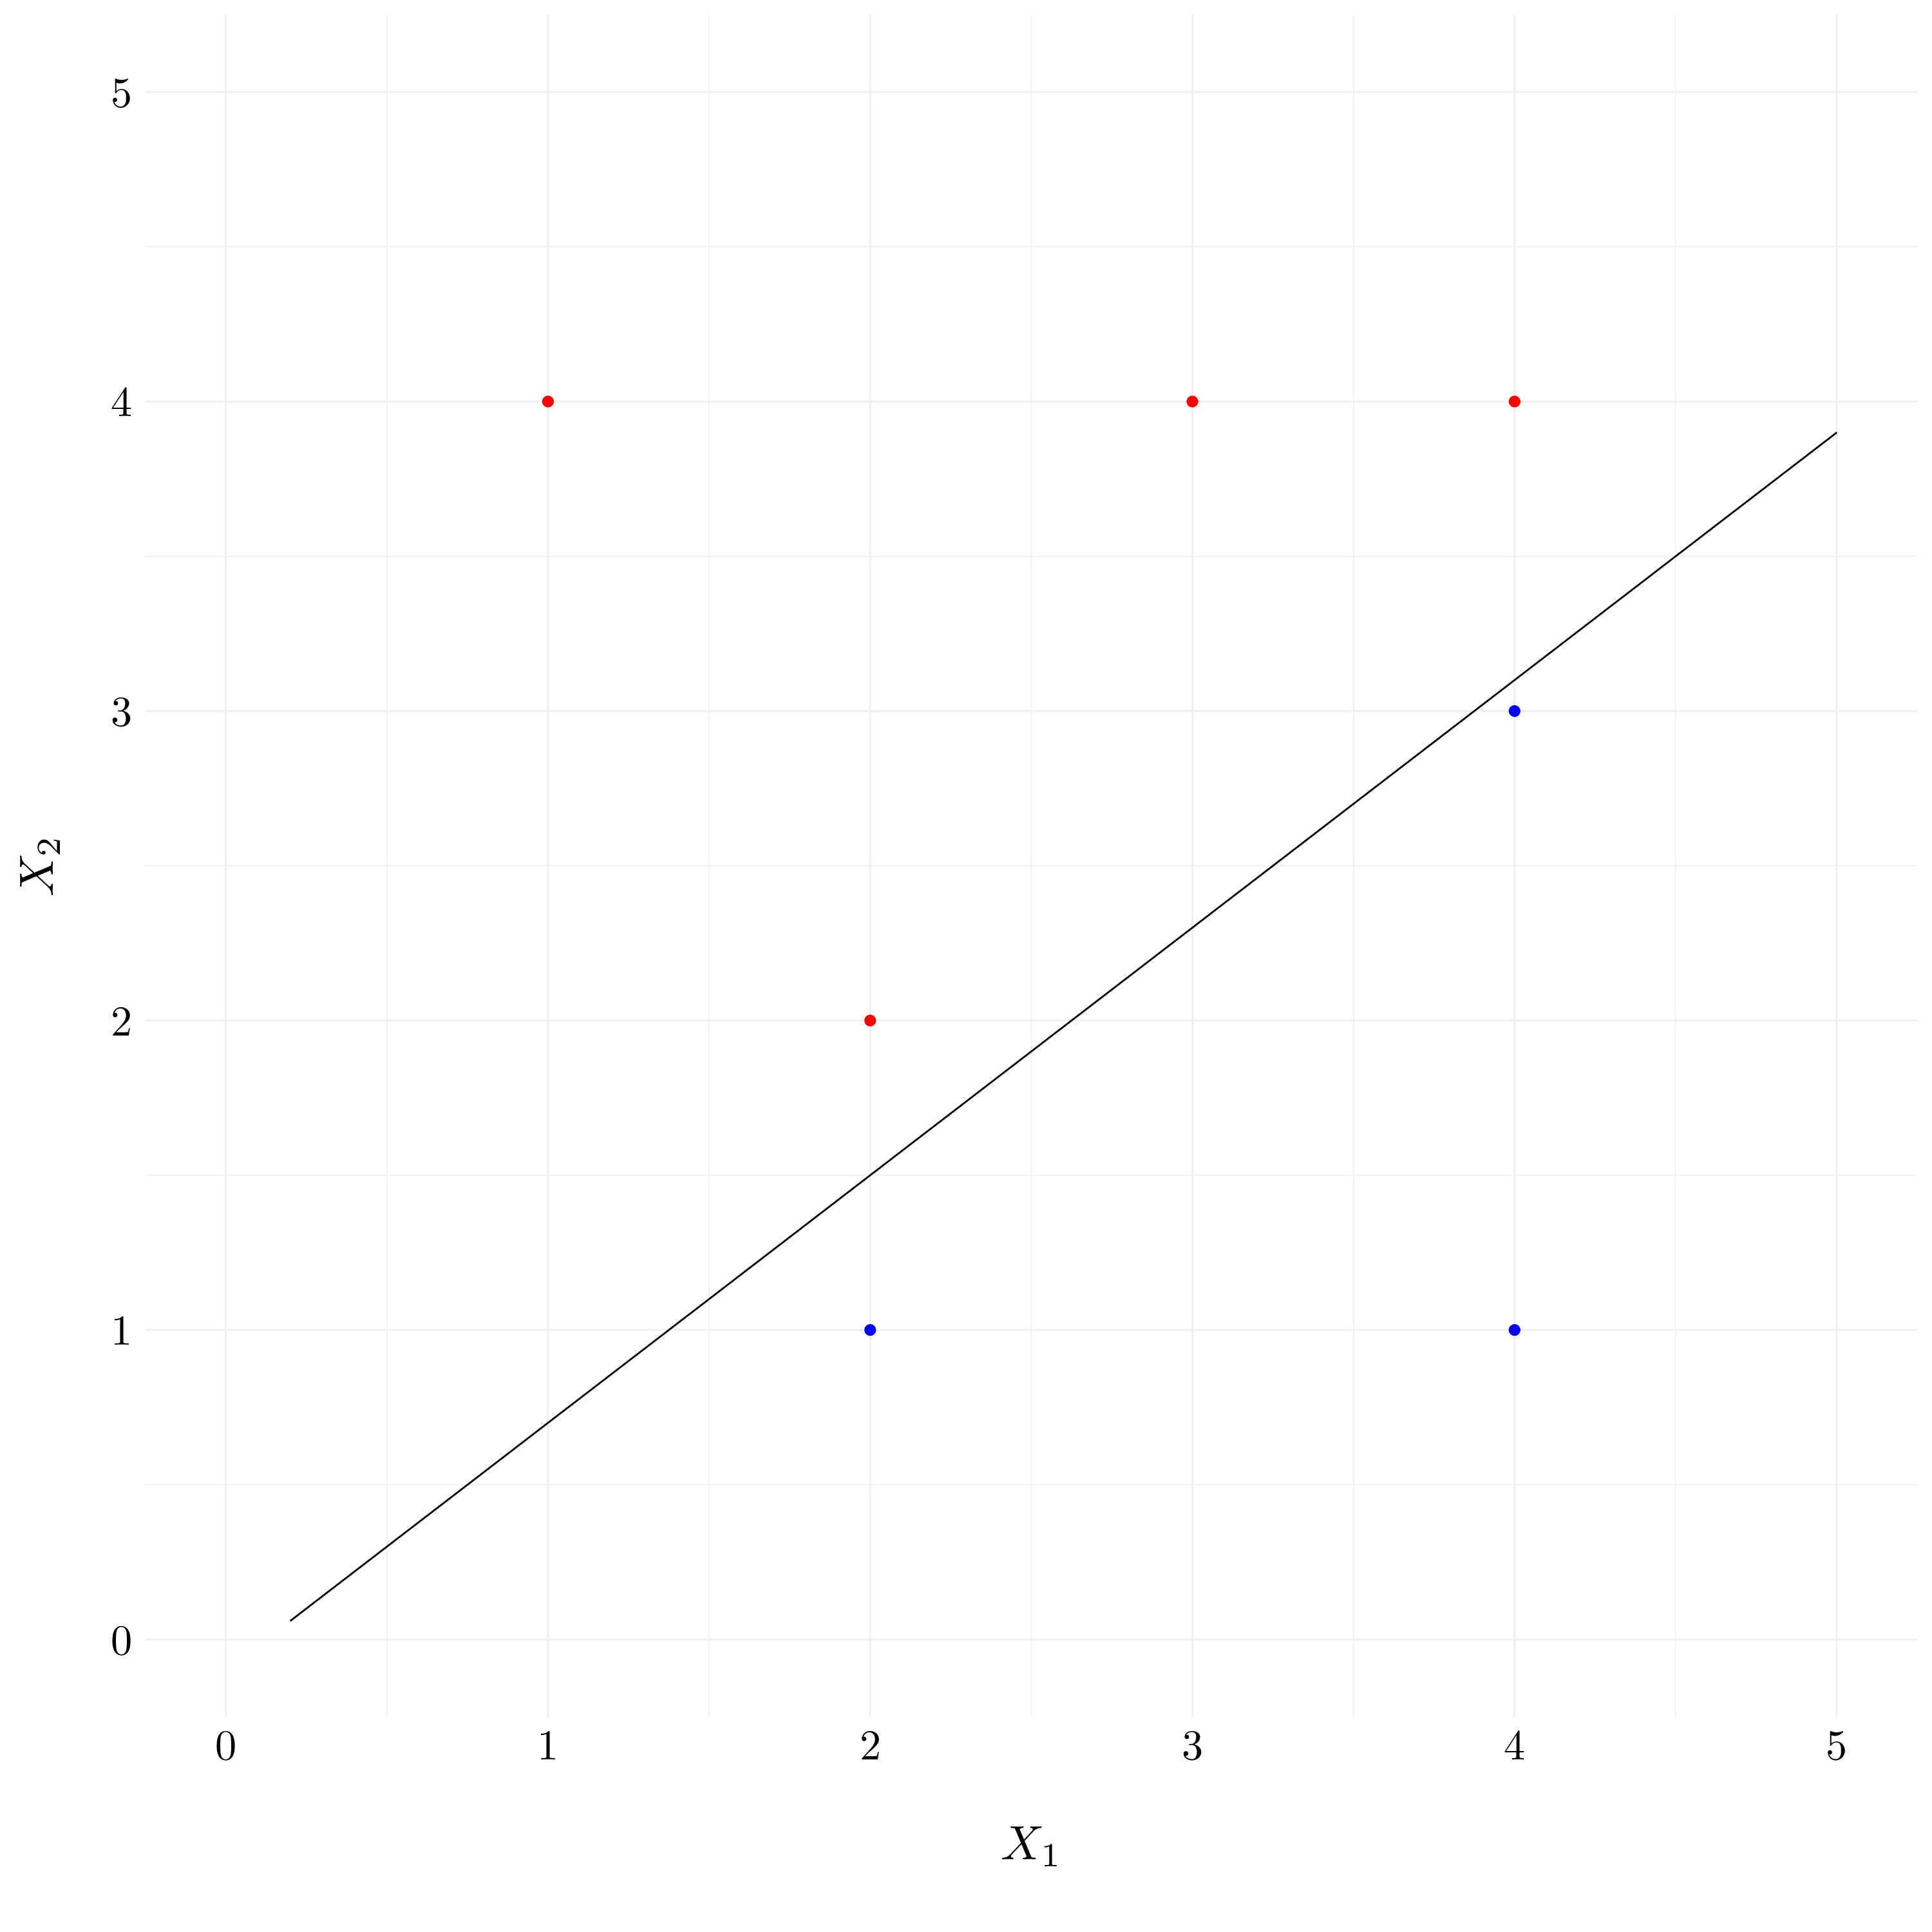 Example of the non-optimal hyperplane